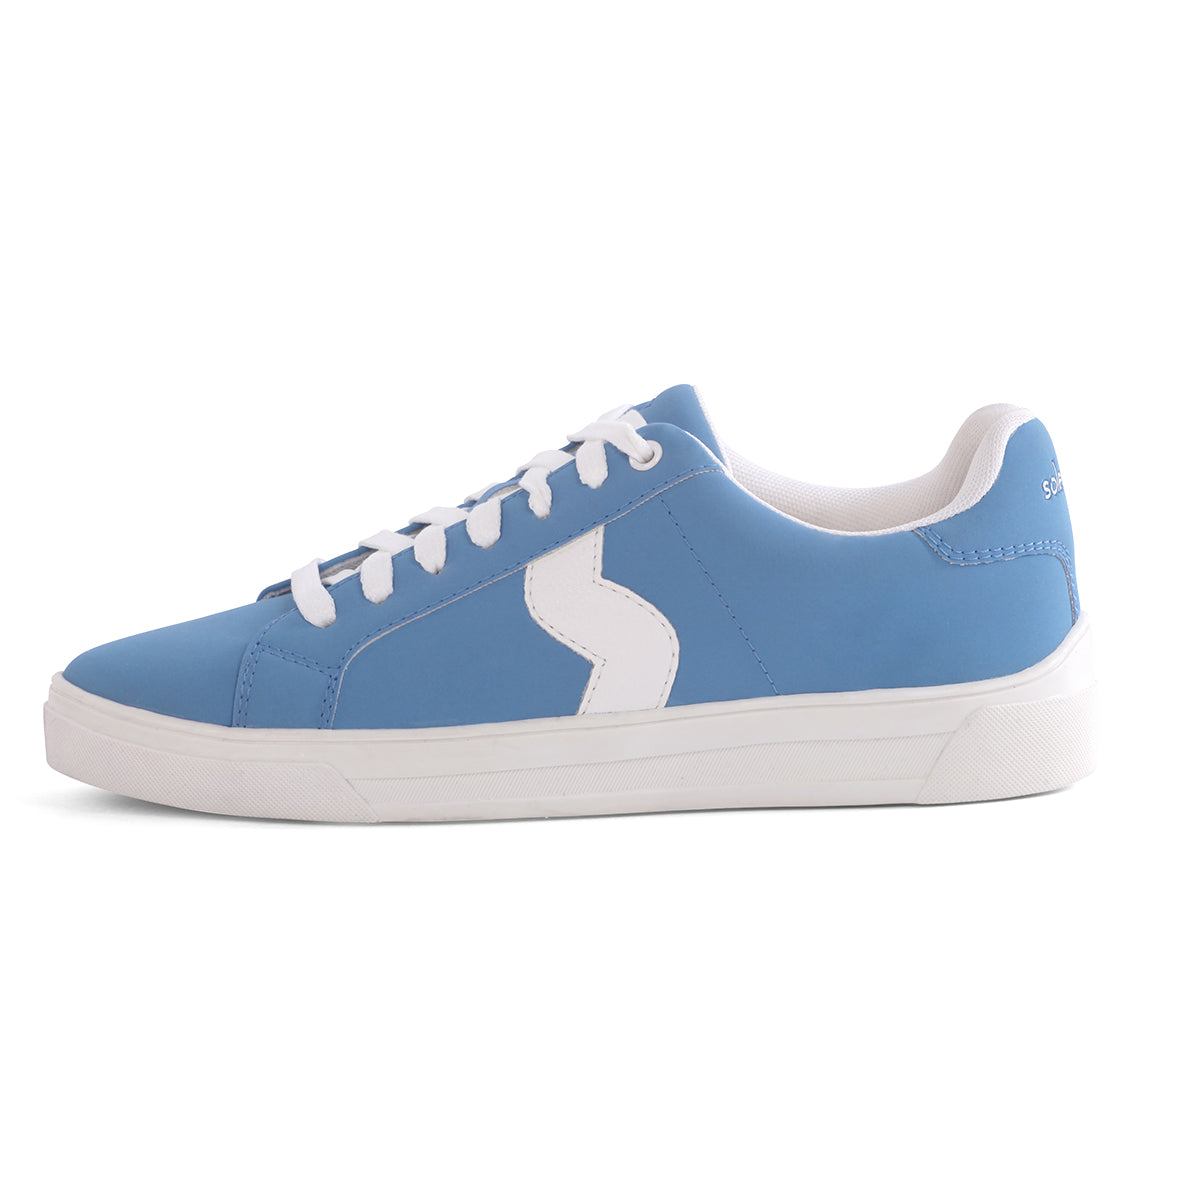 Swatch Sneakers For Women - Solethreads